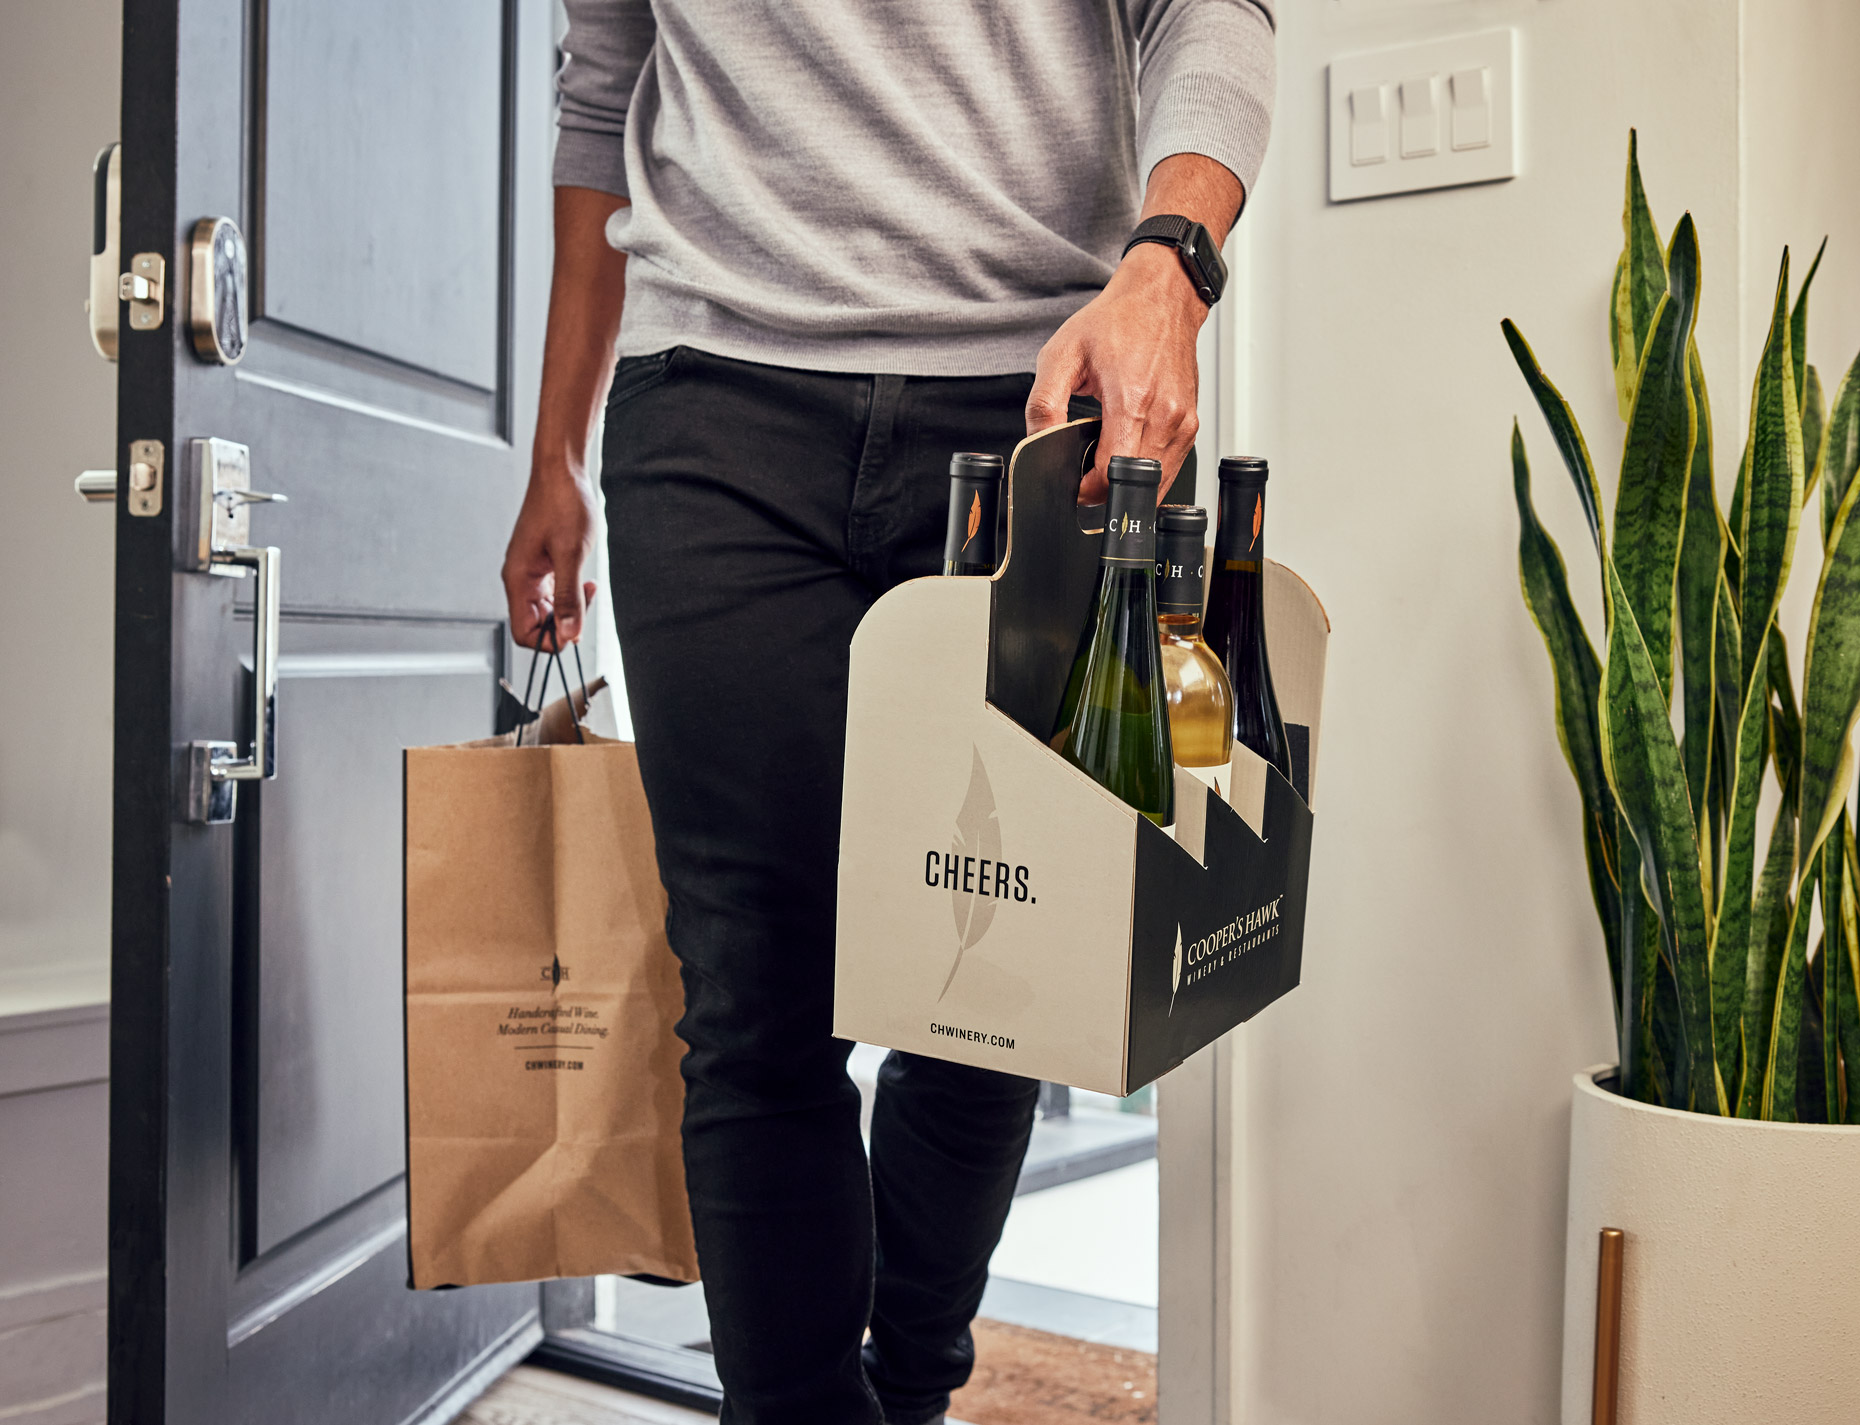 Man coming home with takeout and wine | Saverio Truglia